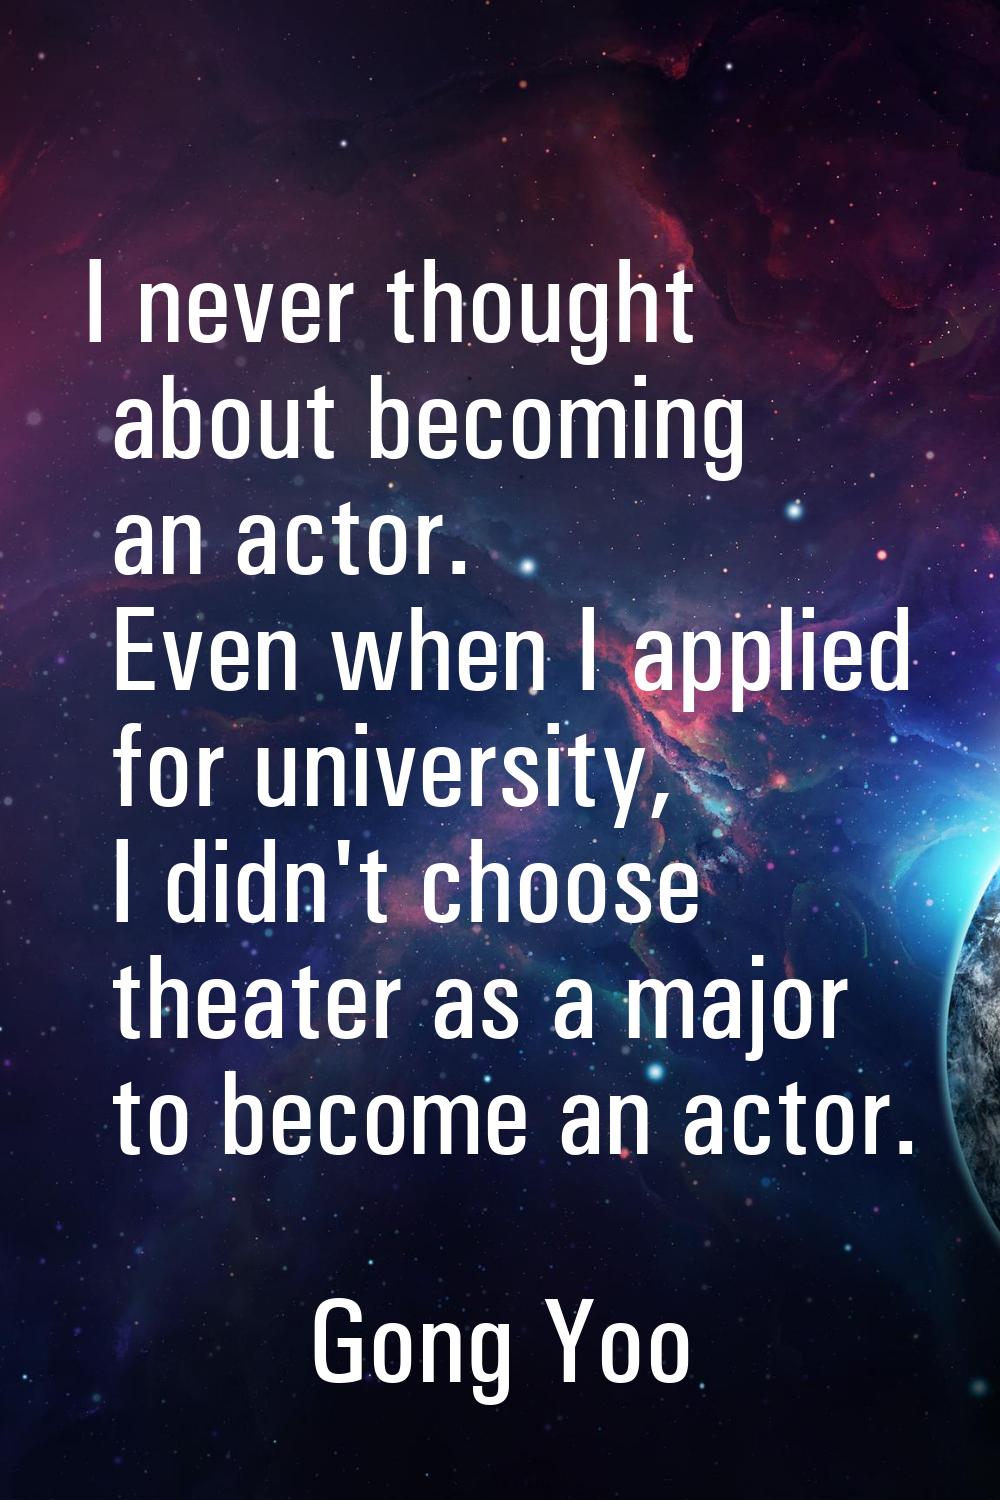 I never thought about becoming an actor. Even when I applied for university, I didn't choose theate